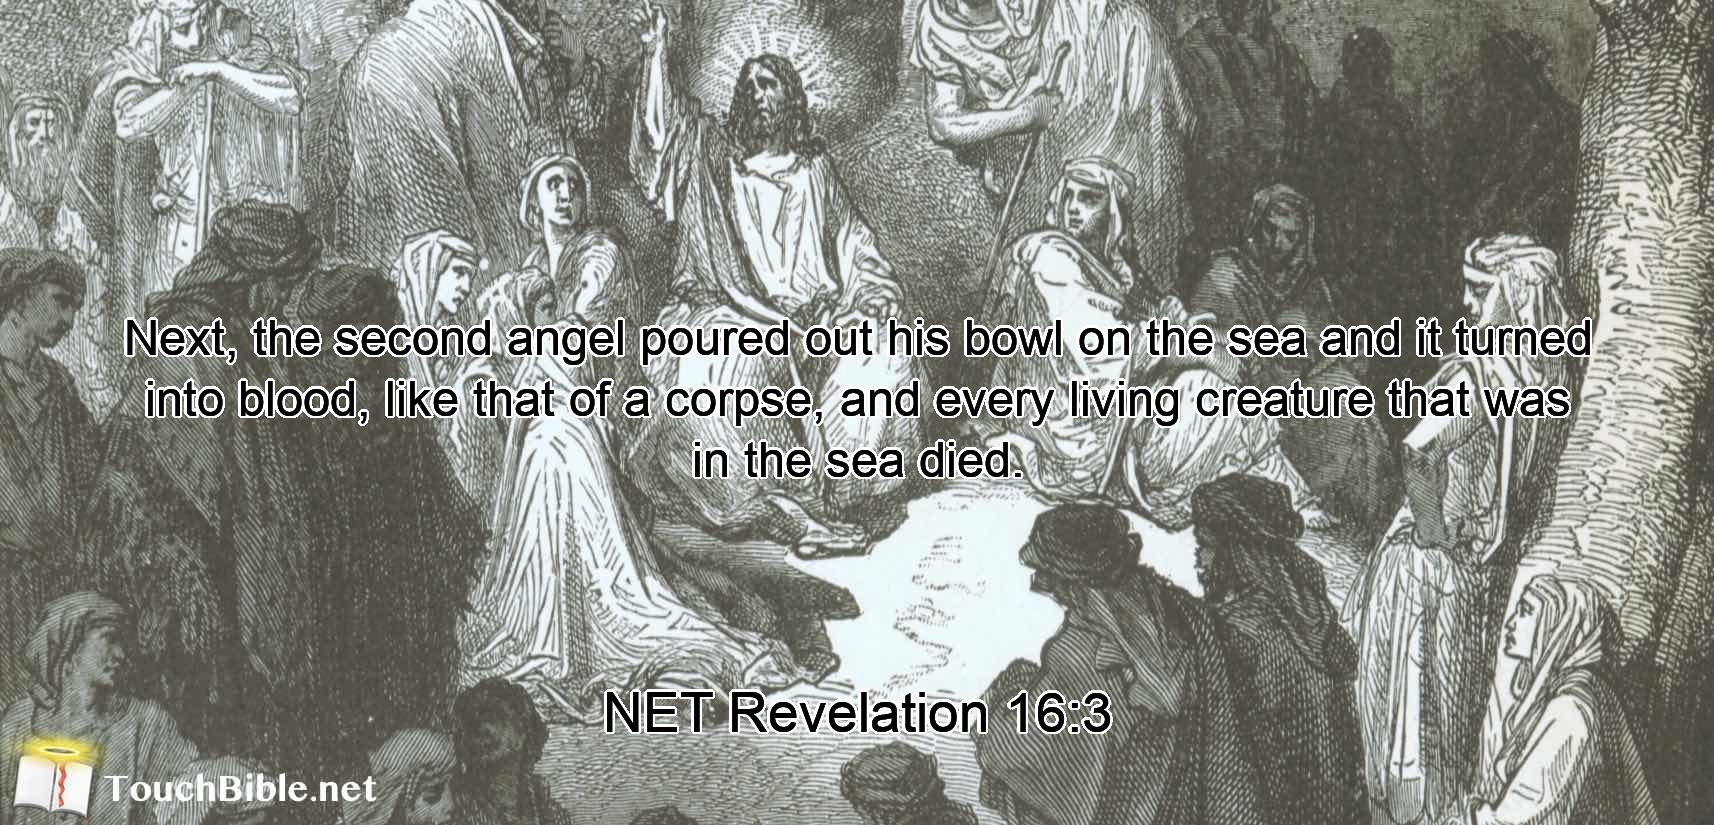 Next,  the second angel  poured out his bowl on the sea and it turned into blood, like that of a corpse, and every living creature that was in the sea died.